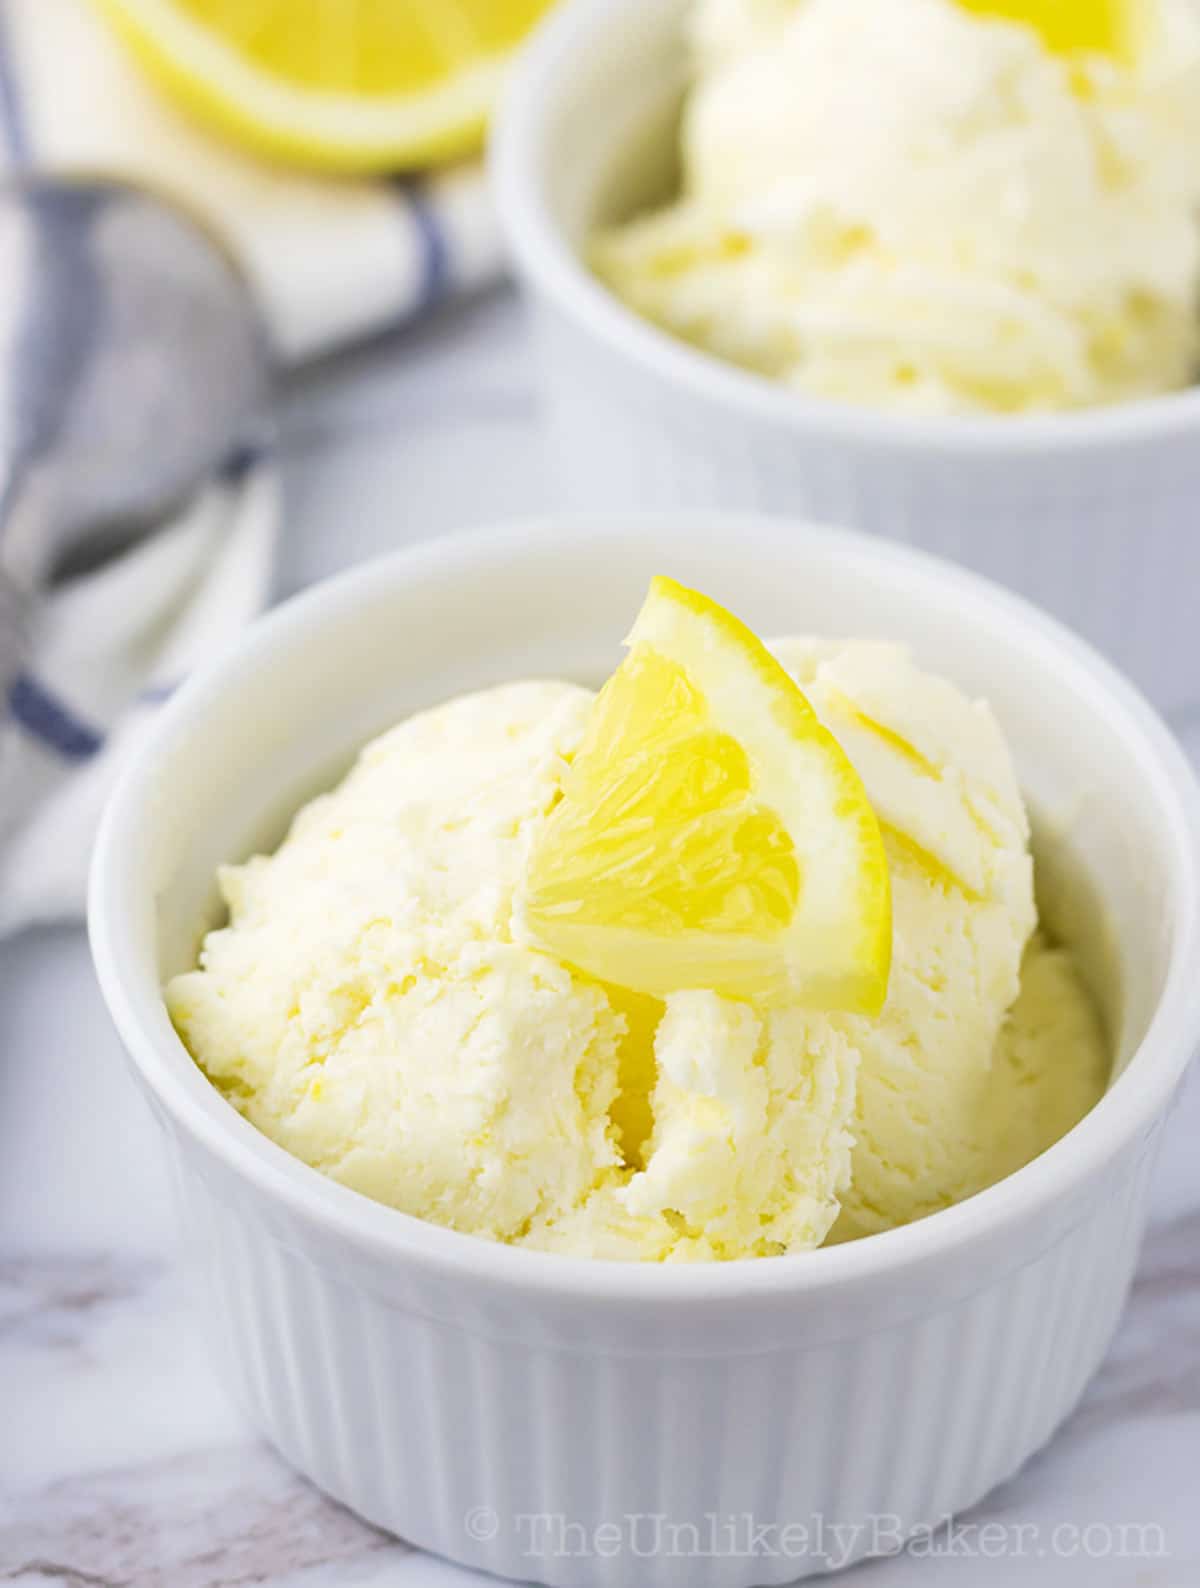 Several scoops of lemon ice cream in a white bowl.